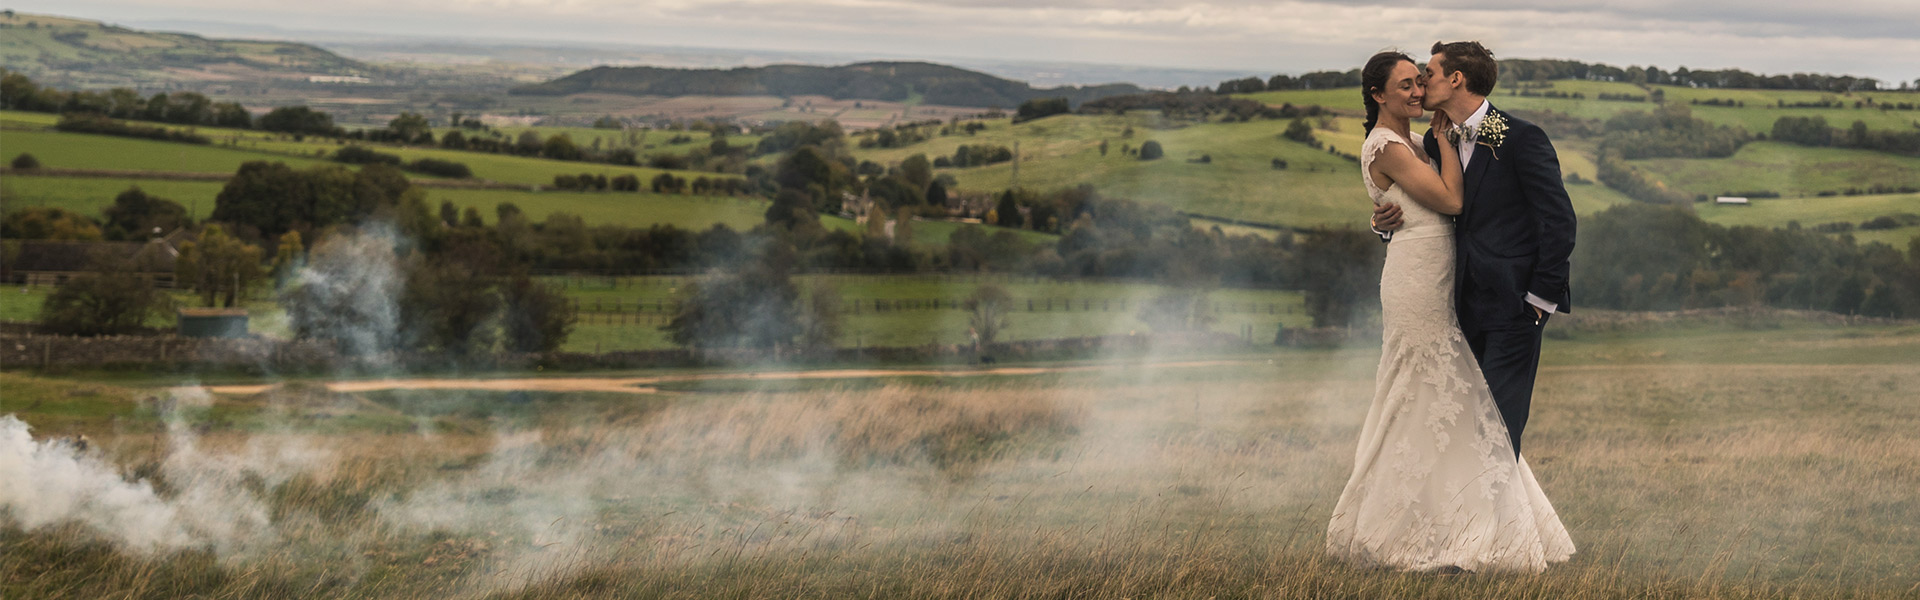 lee hawley photography creative candid natural photographer cheltenham cotswolds gloucestershire cleeve hill smoke